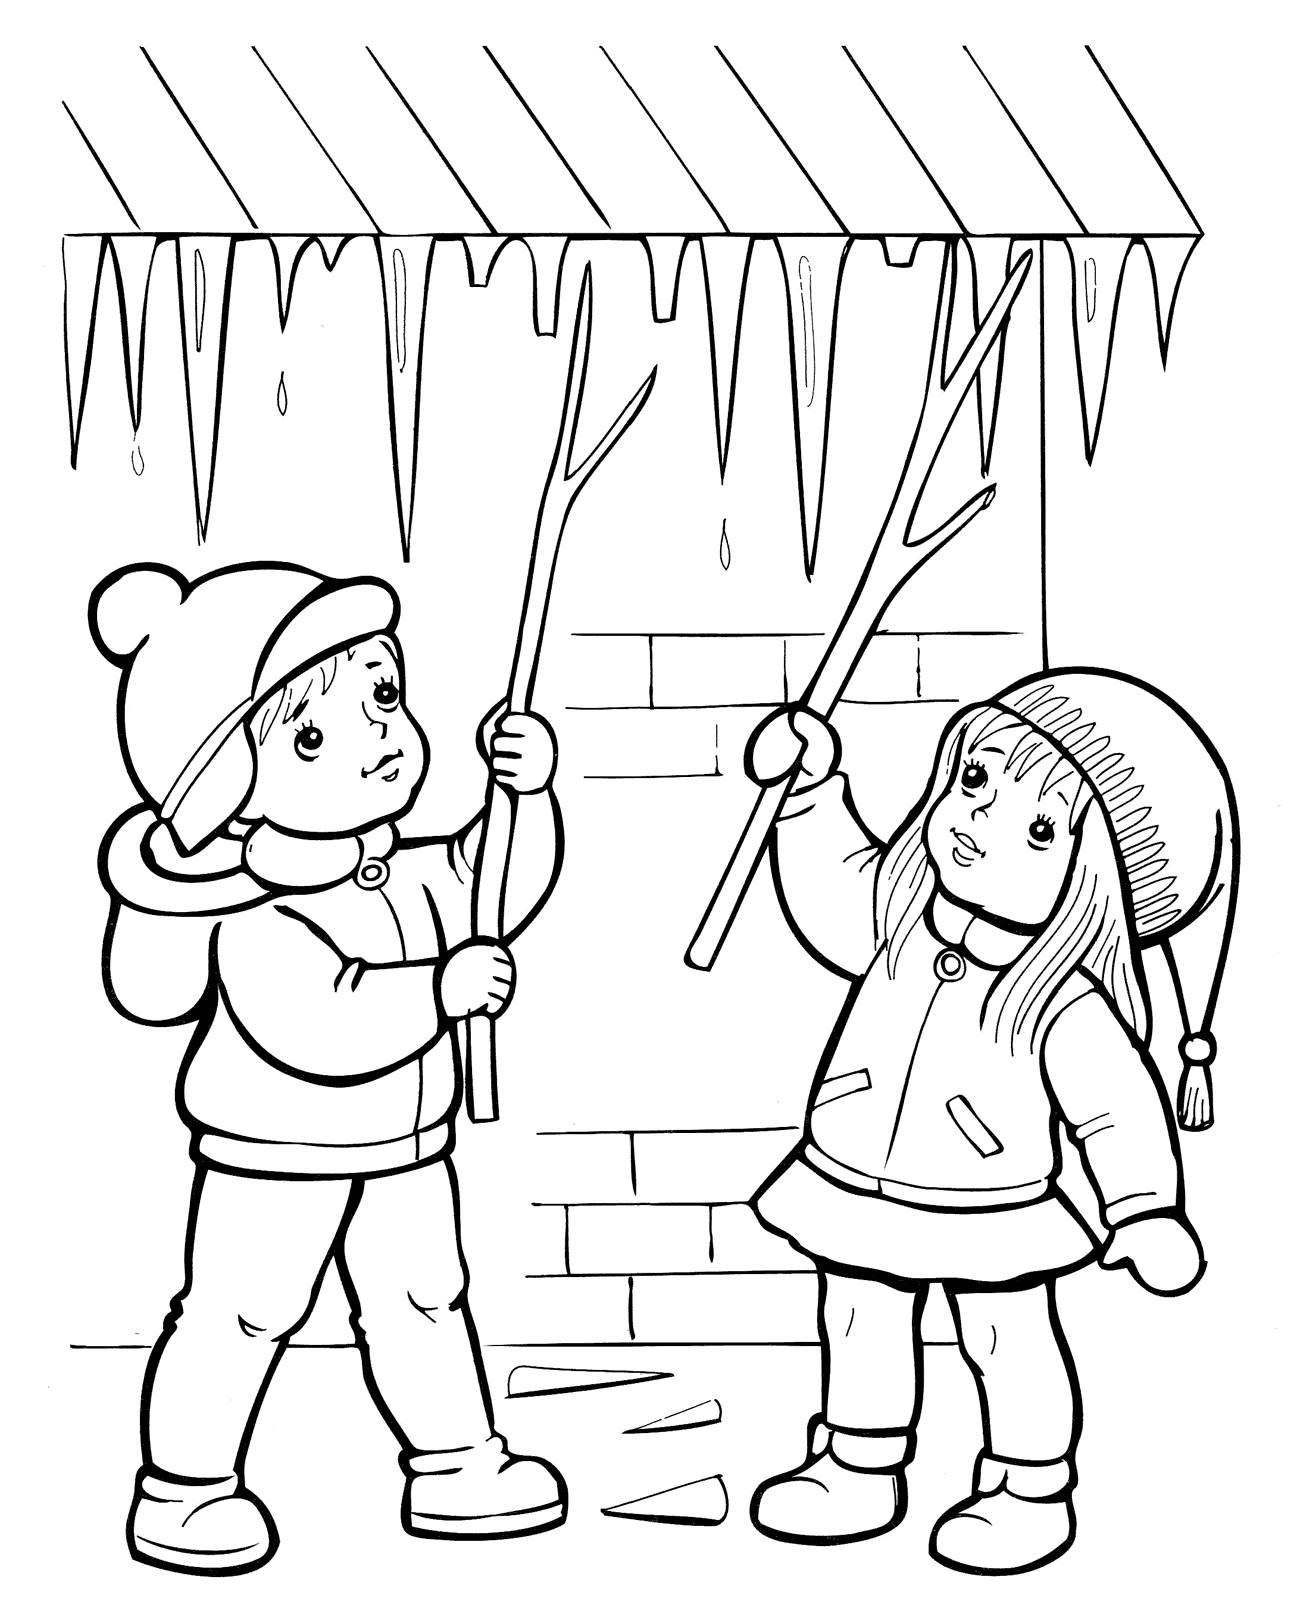 Children knock down icicles